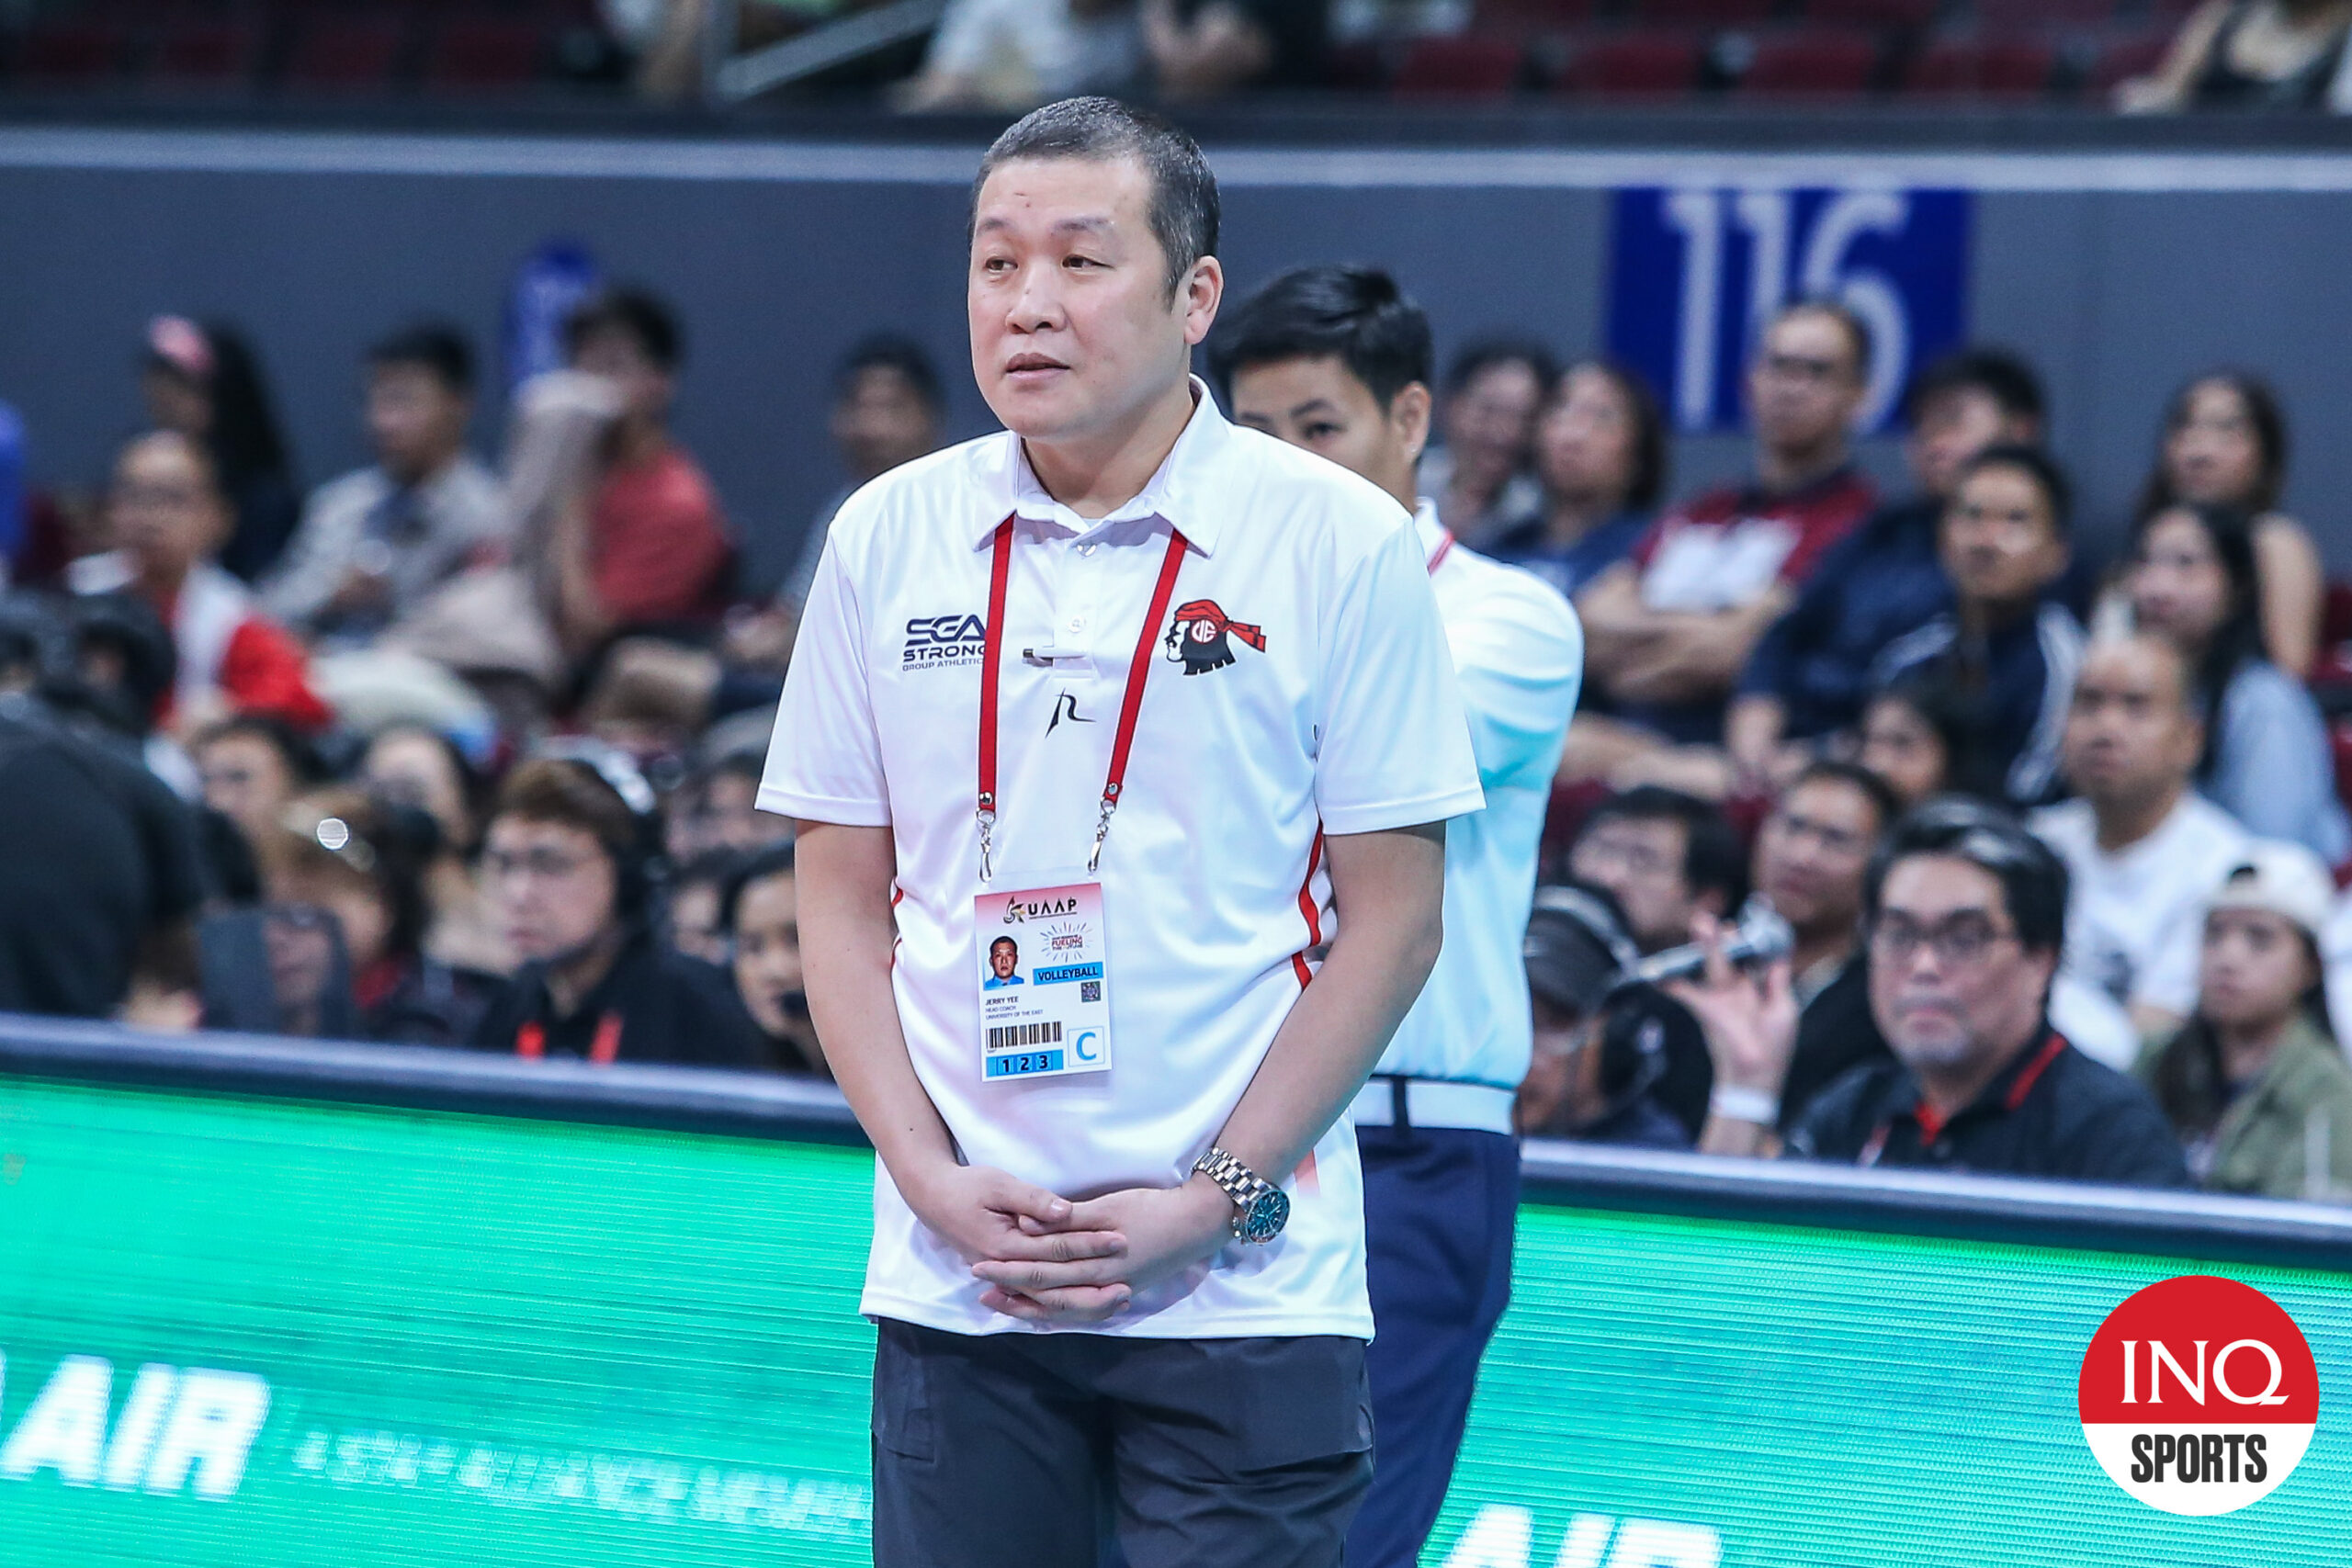 ue coach jerry yee blasts uaap suspension, claims ‘no due process’